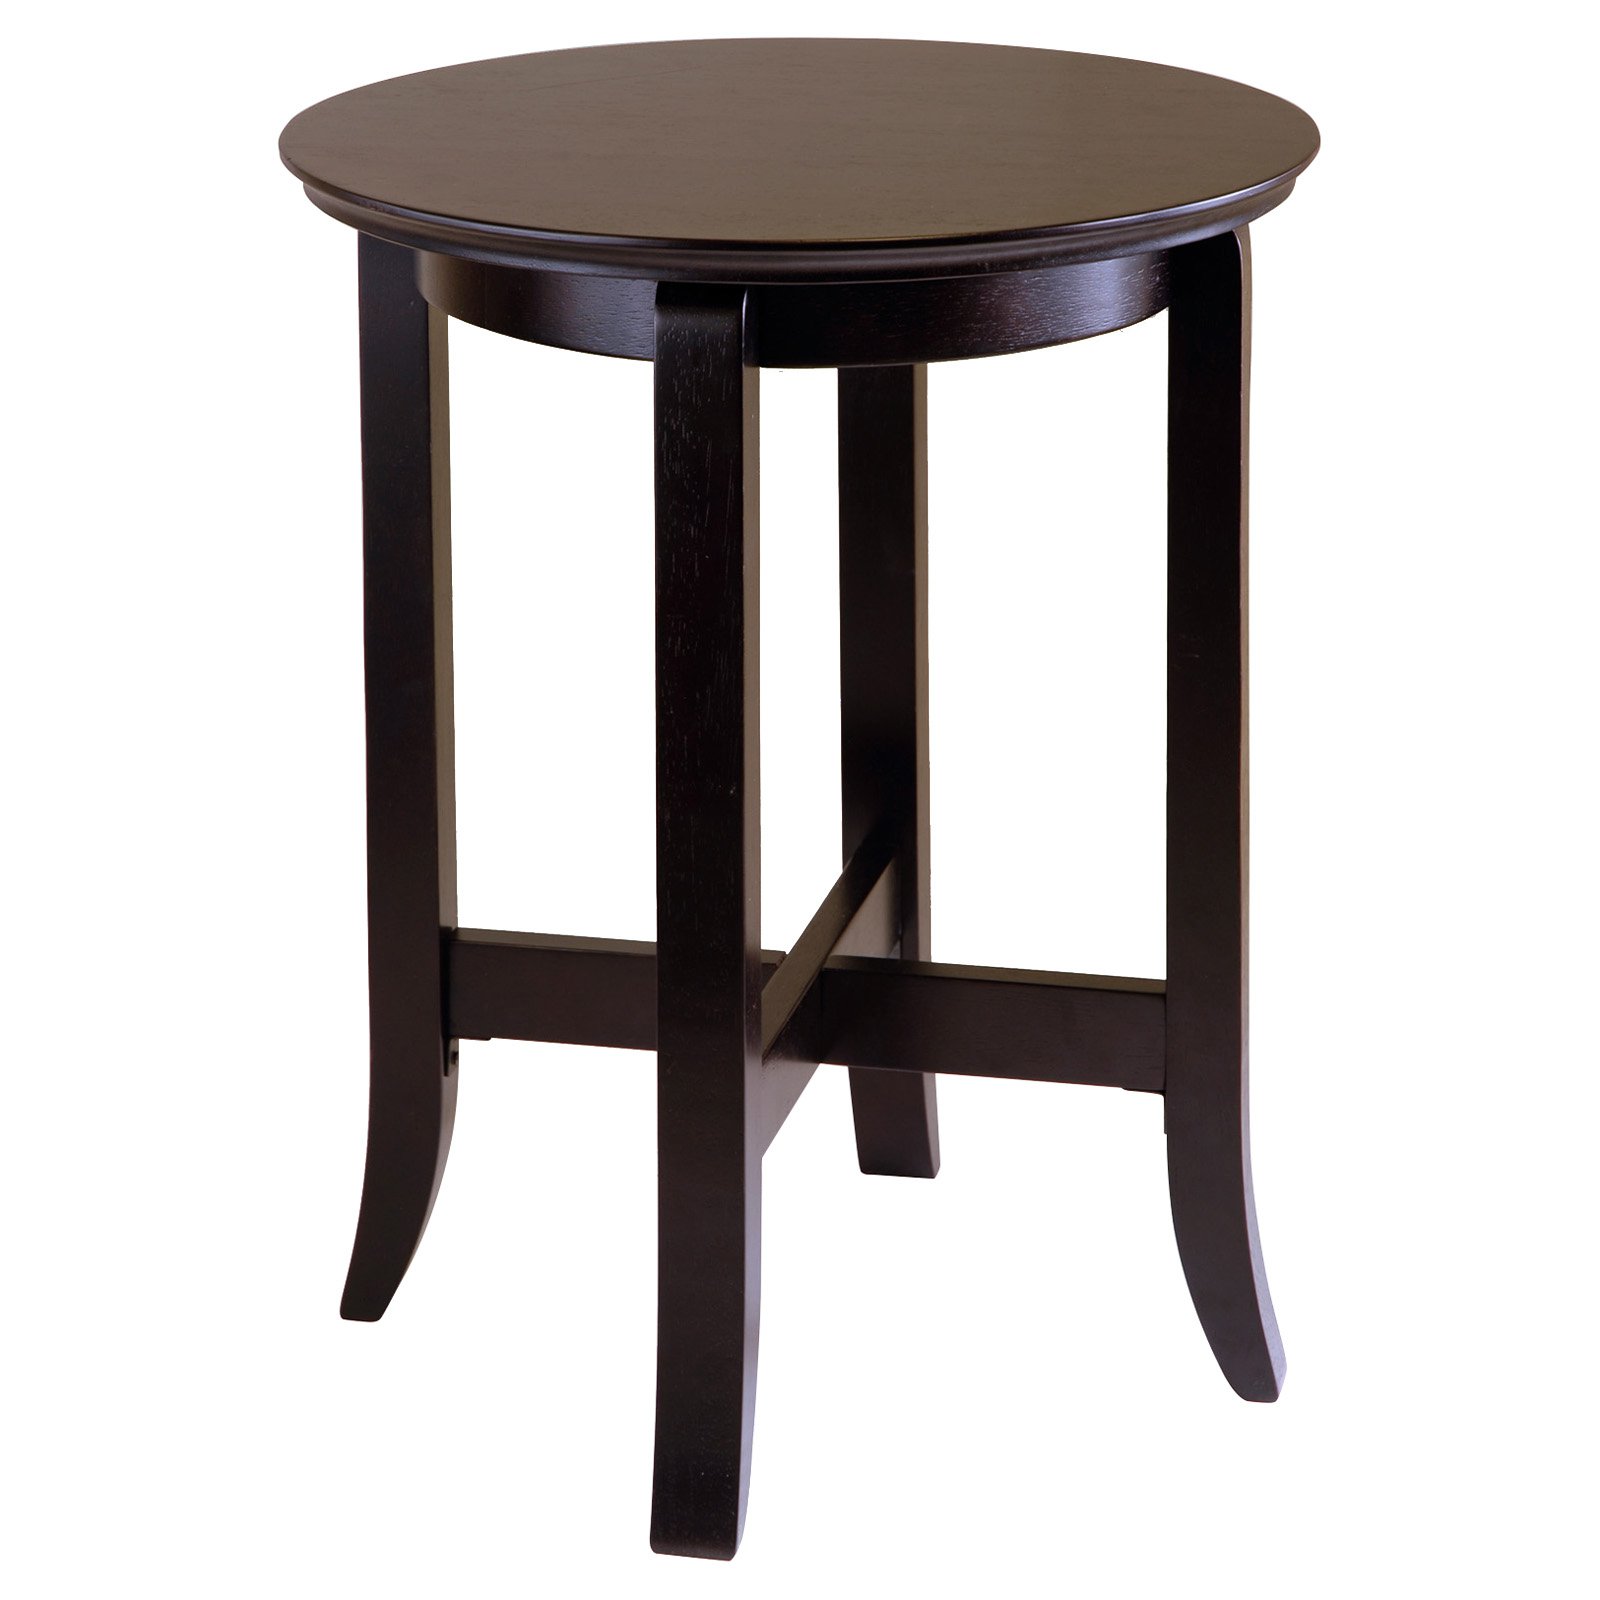 Winsome Wood Toby Round Accent Table, Espresso Finish - image 1 of 2